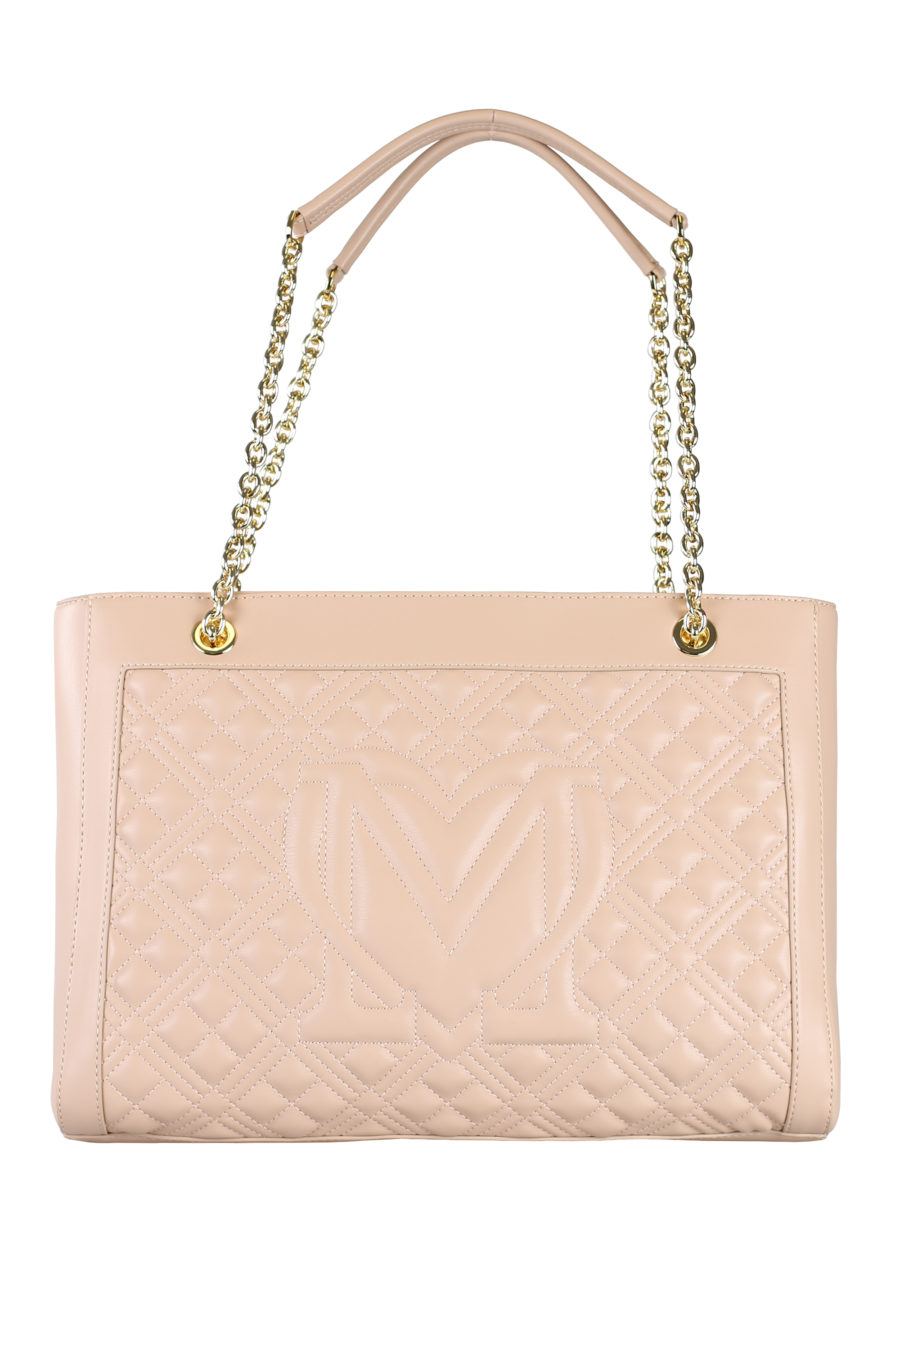 Nude coloured quilted bag with golden chain - IMG 1962